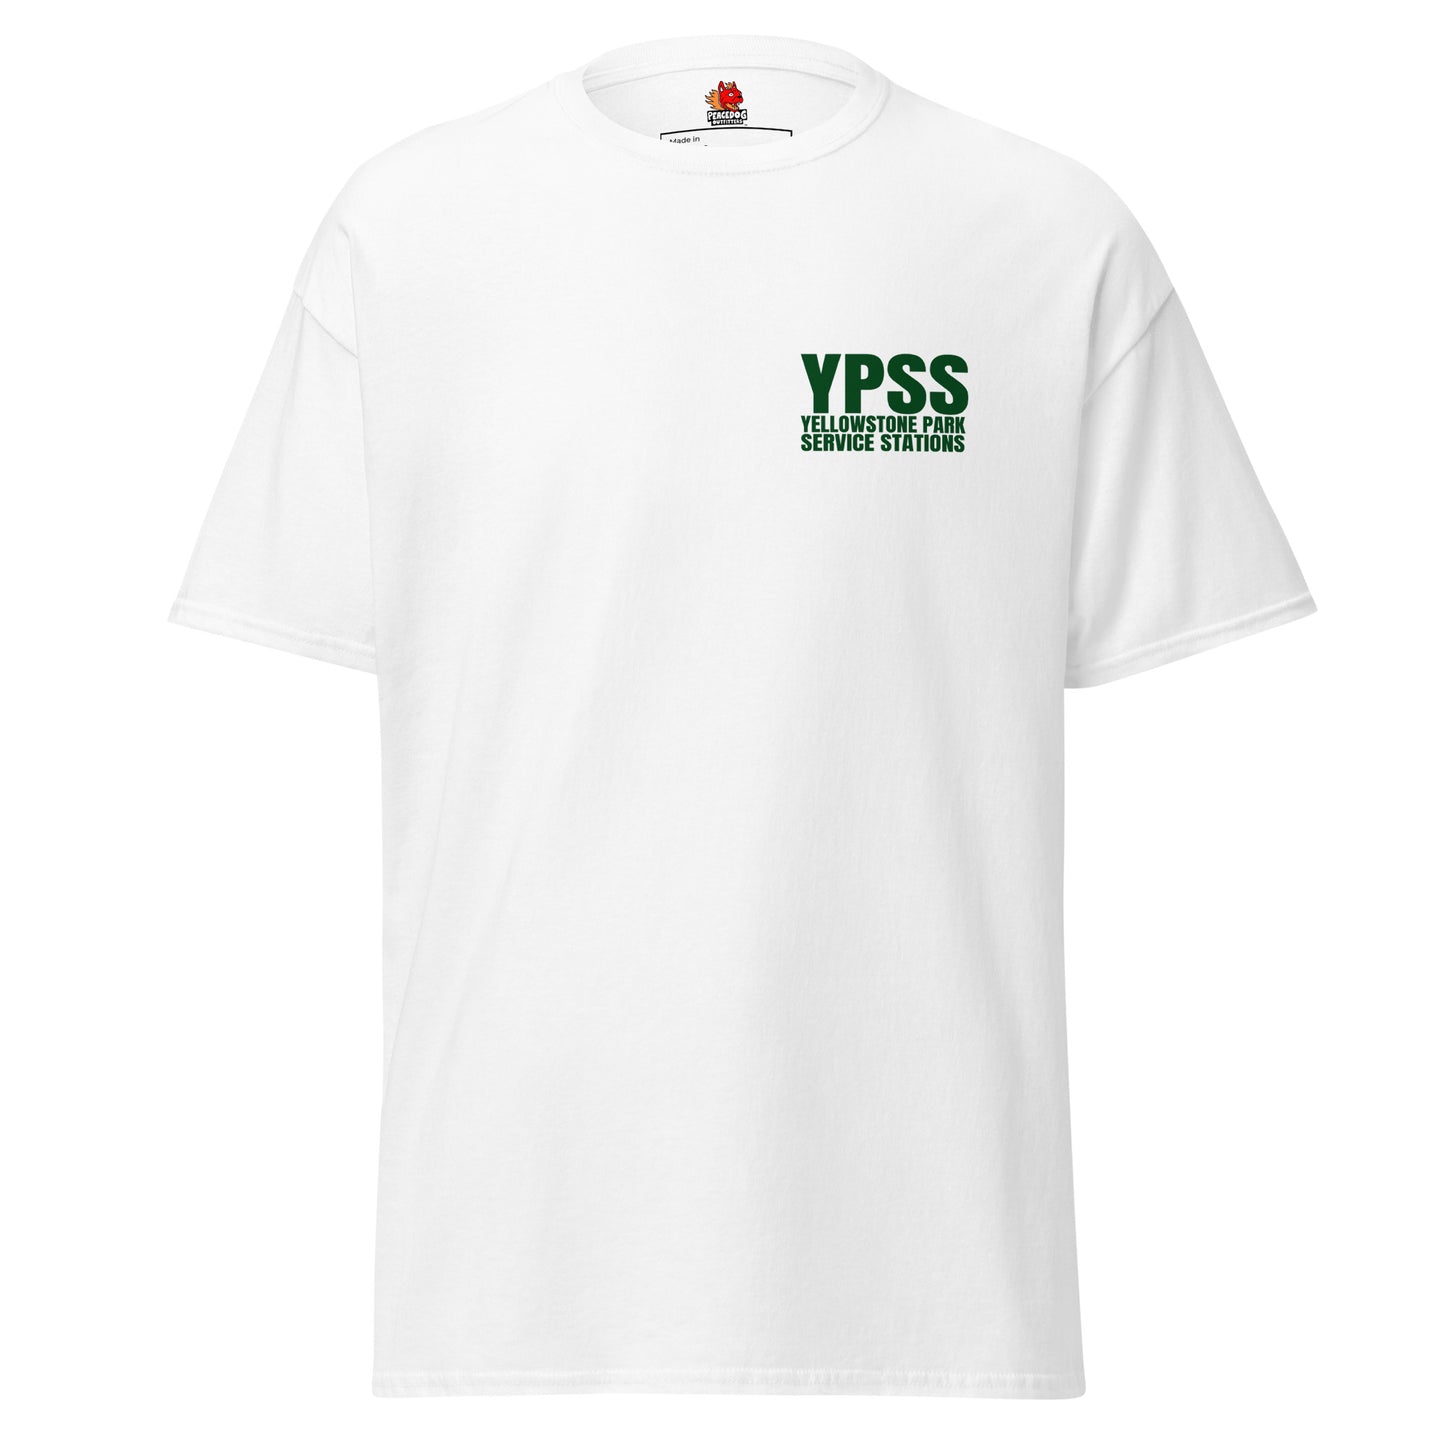 YPSS Yellowstone Park Service Stations - Old Faithul Upper Station - Classic Tee